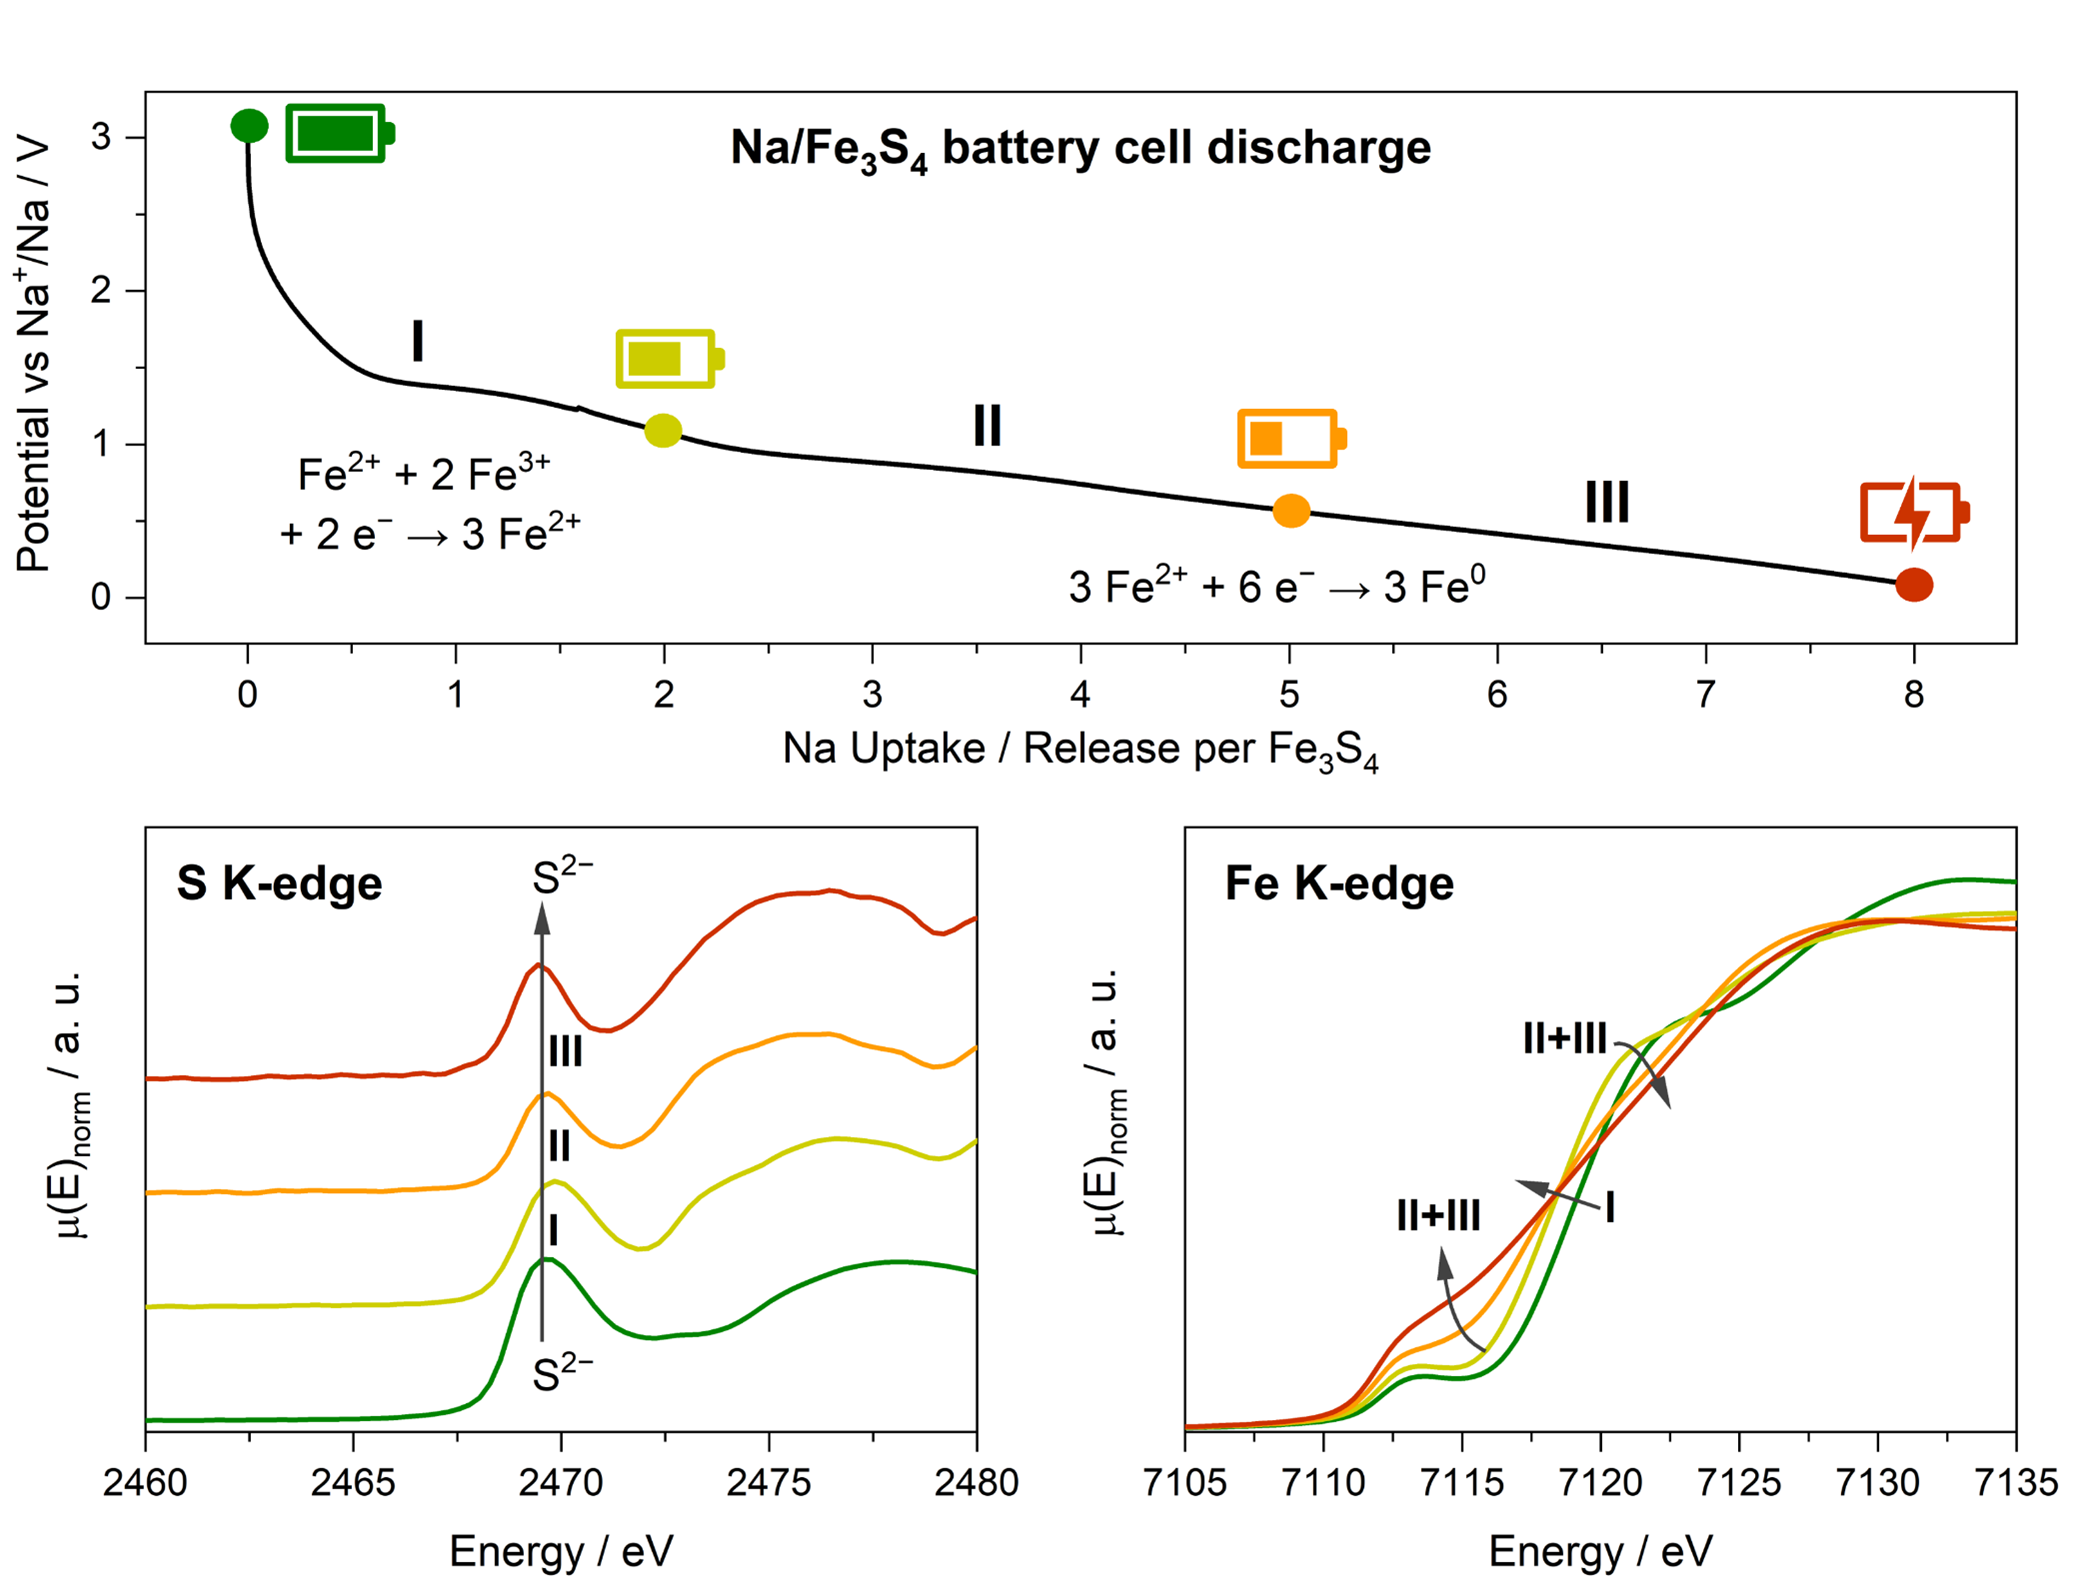 Figure: Simplified reaction mechanism of the anode material nano-Fe3S4 during discharge and charge vs. Na+/Na in sodium-ion battery cells: X-ray absorption spectroscopy experiments at Diamond Light Source (beamline B18) revealed the cationic redox chemistry during Na storage, which involves Fe3+, Fe2+, and Fe0 products. 